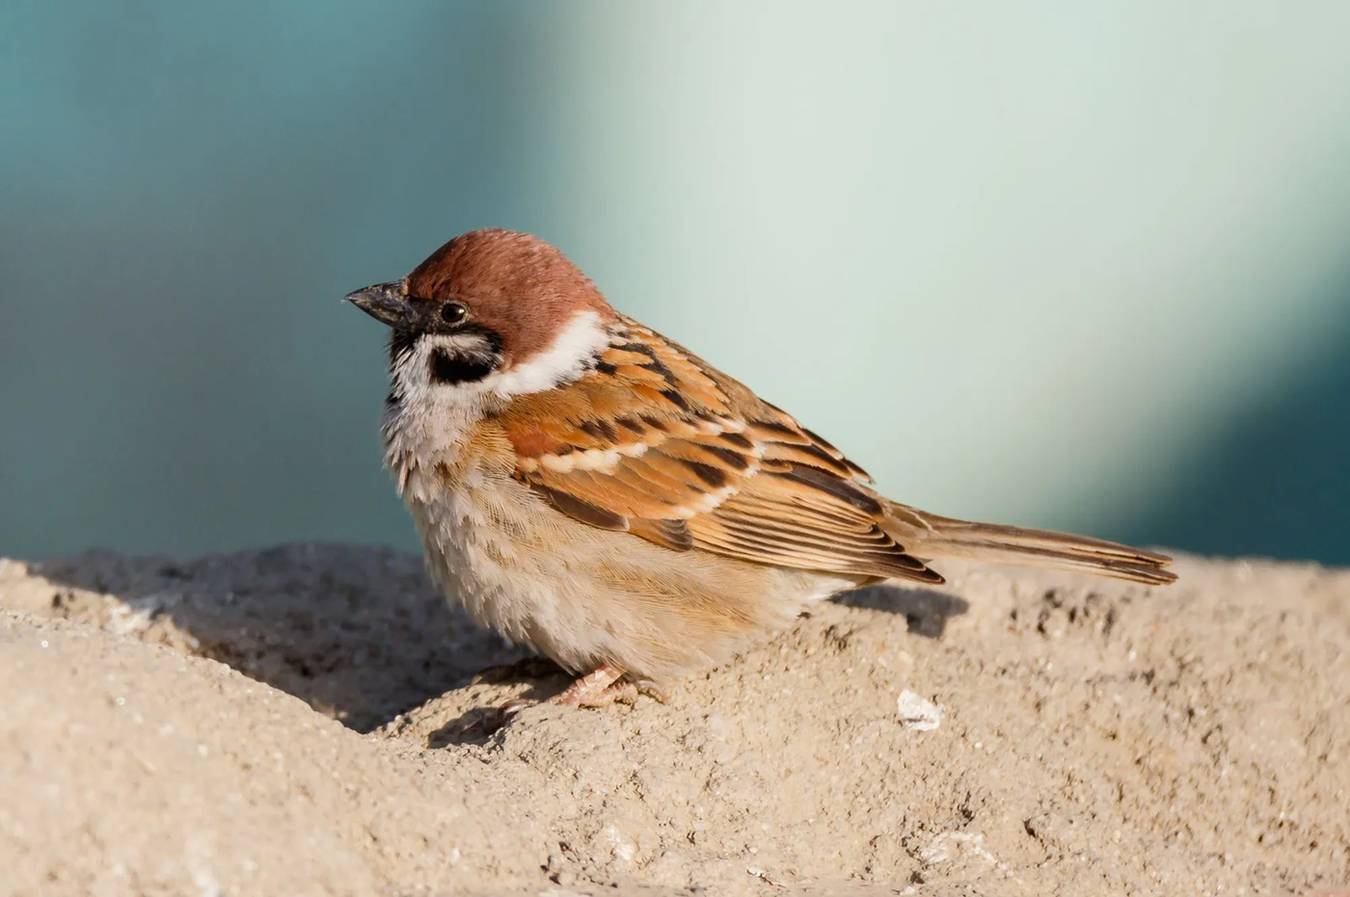 Facts about the preservation of Swamp Sparrows.